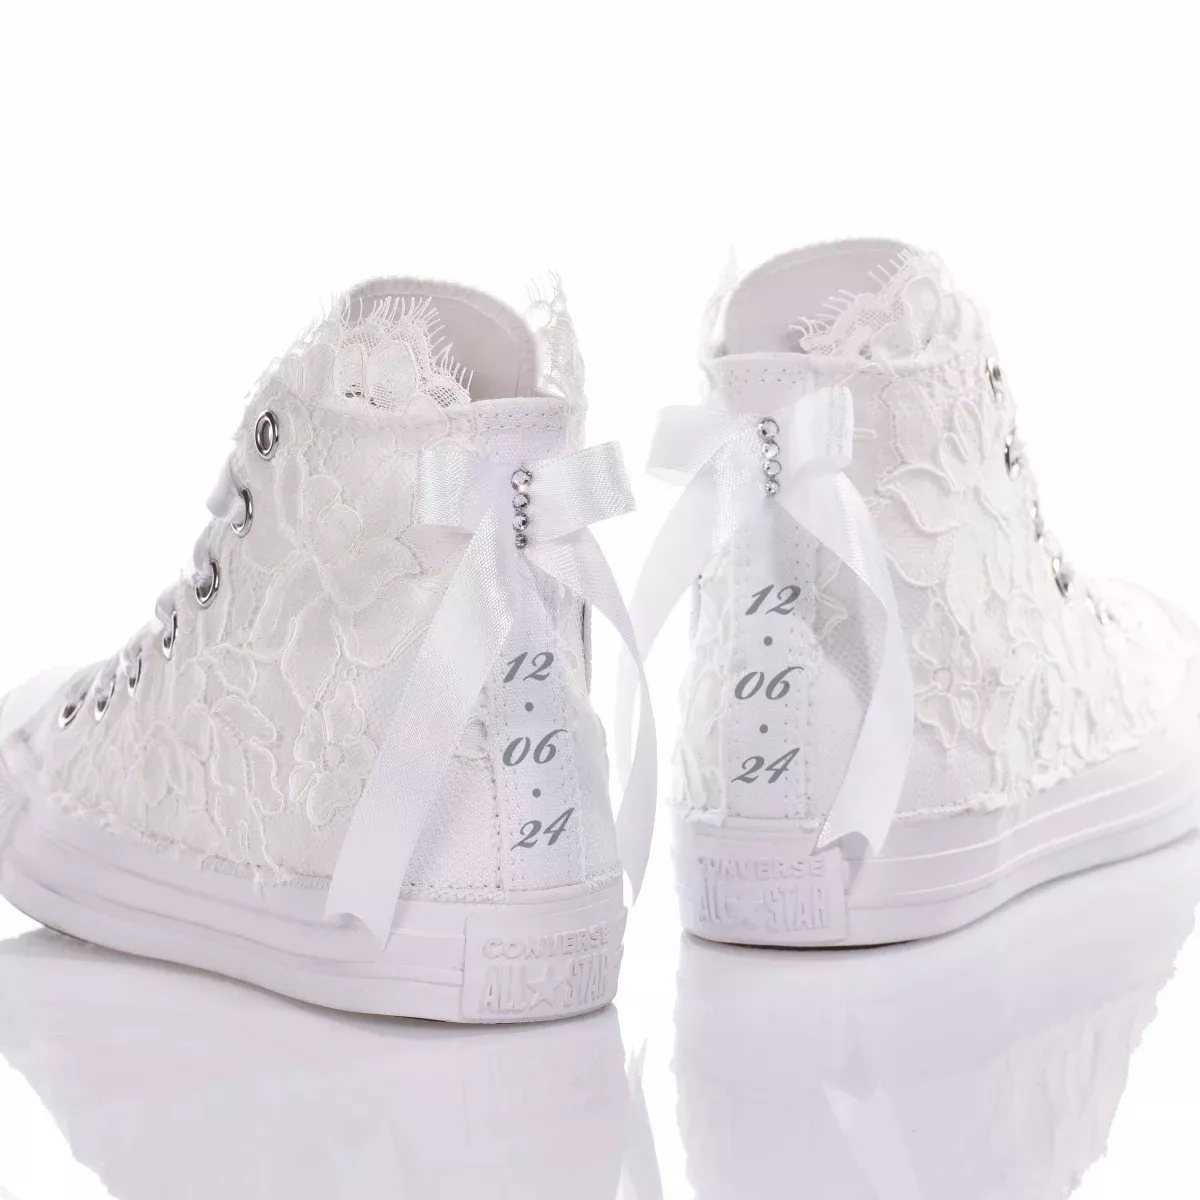 Converse Amabel Chuck Taylor High Top Lace